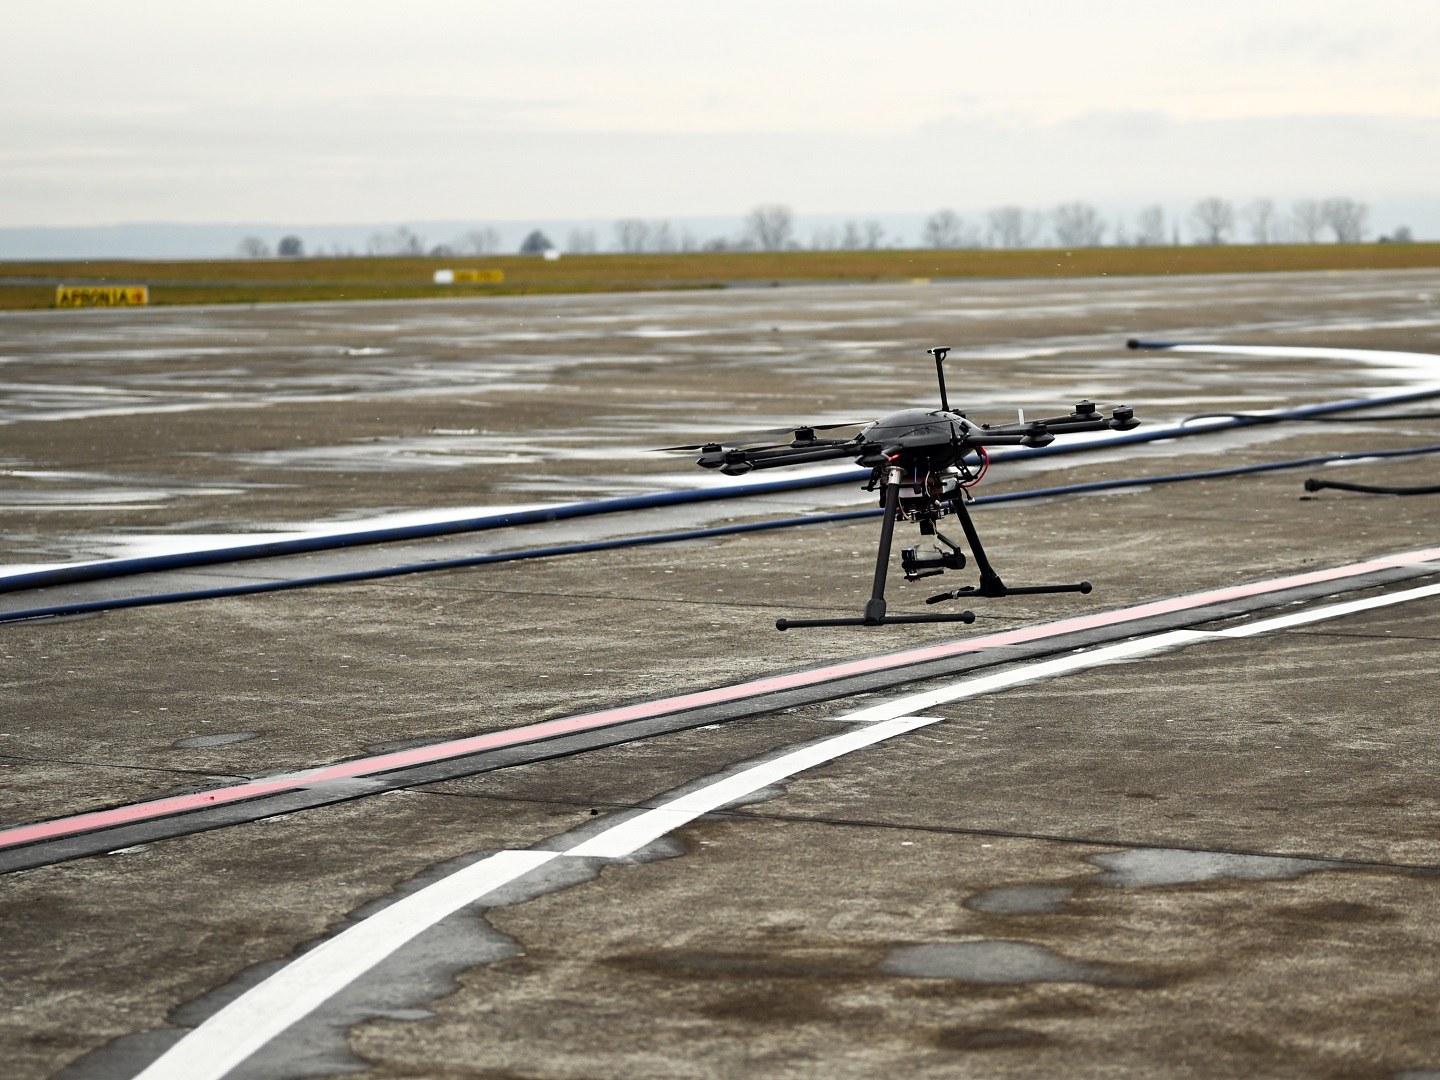 Specially equipped DexHawk research drone during take-off